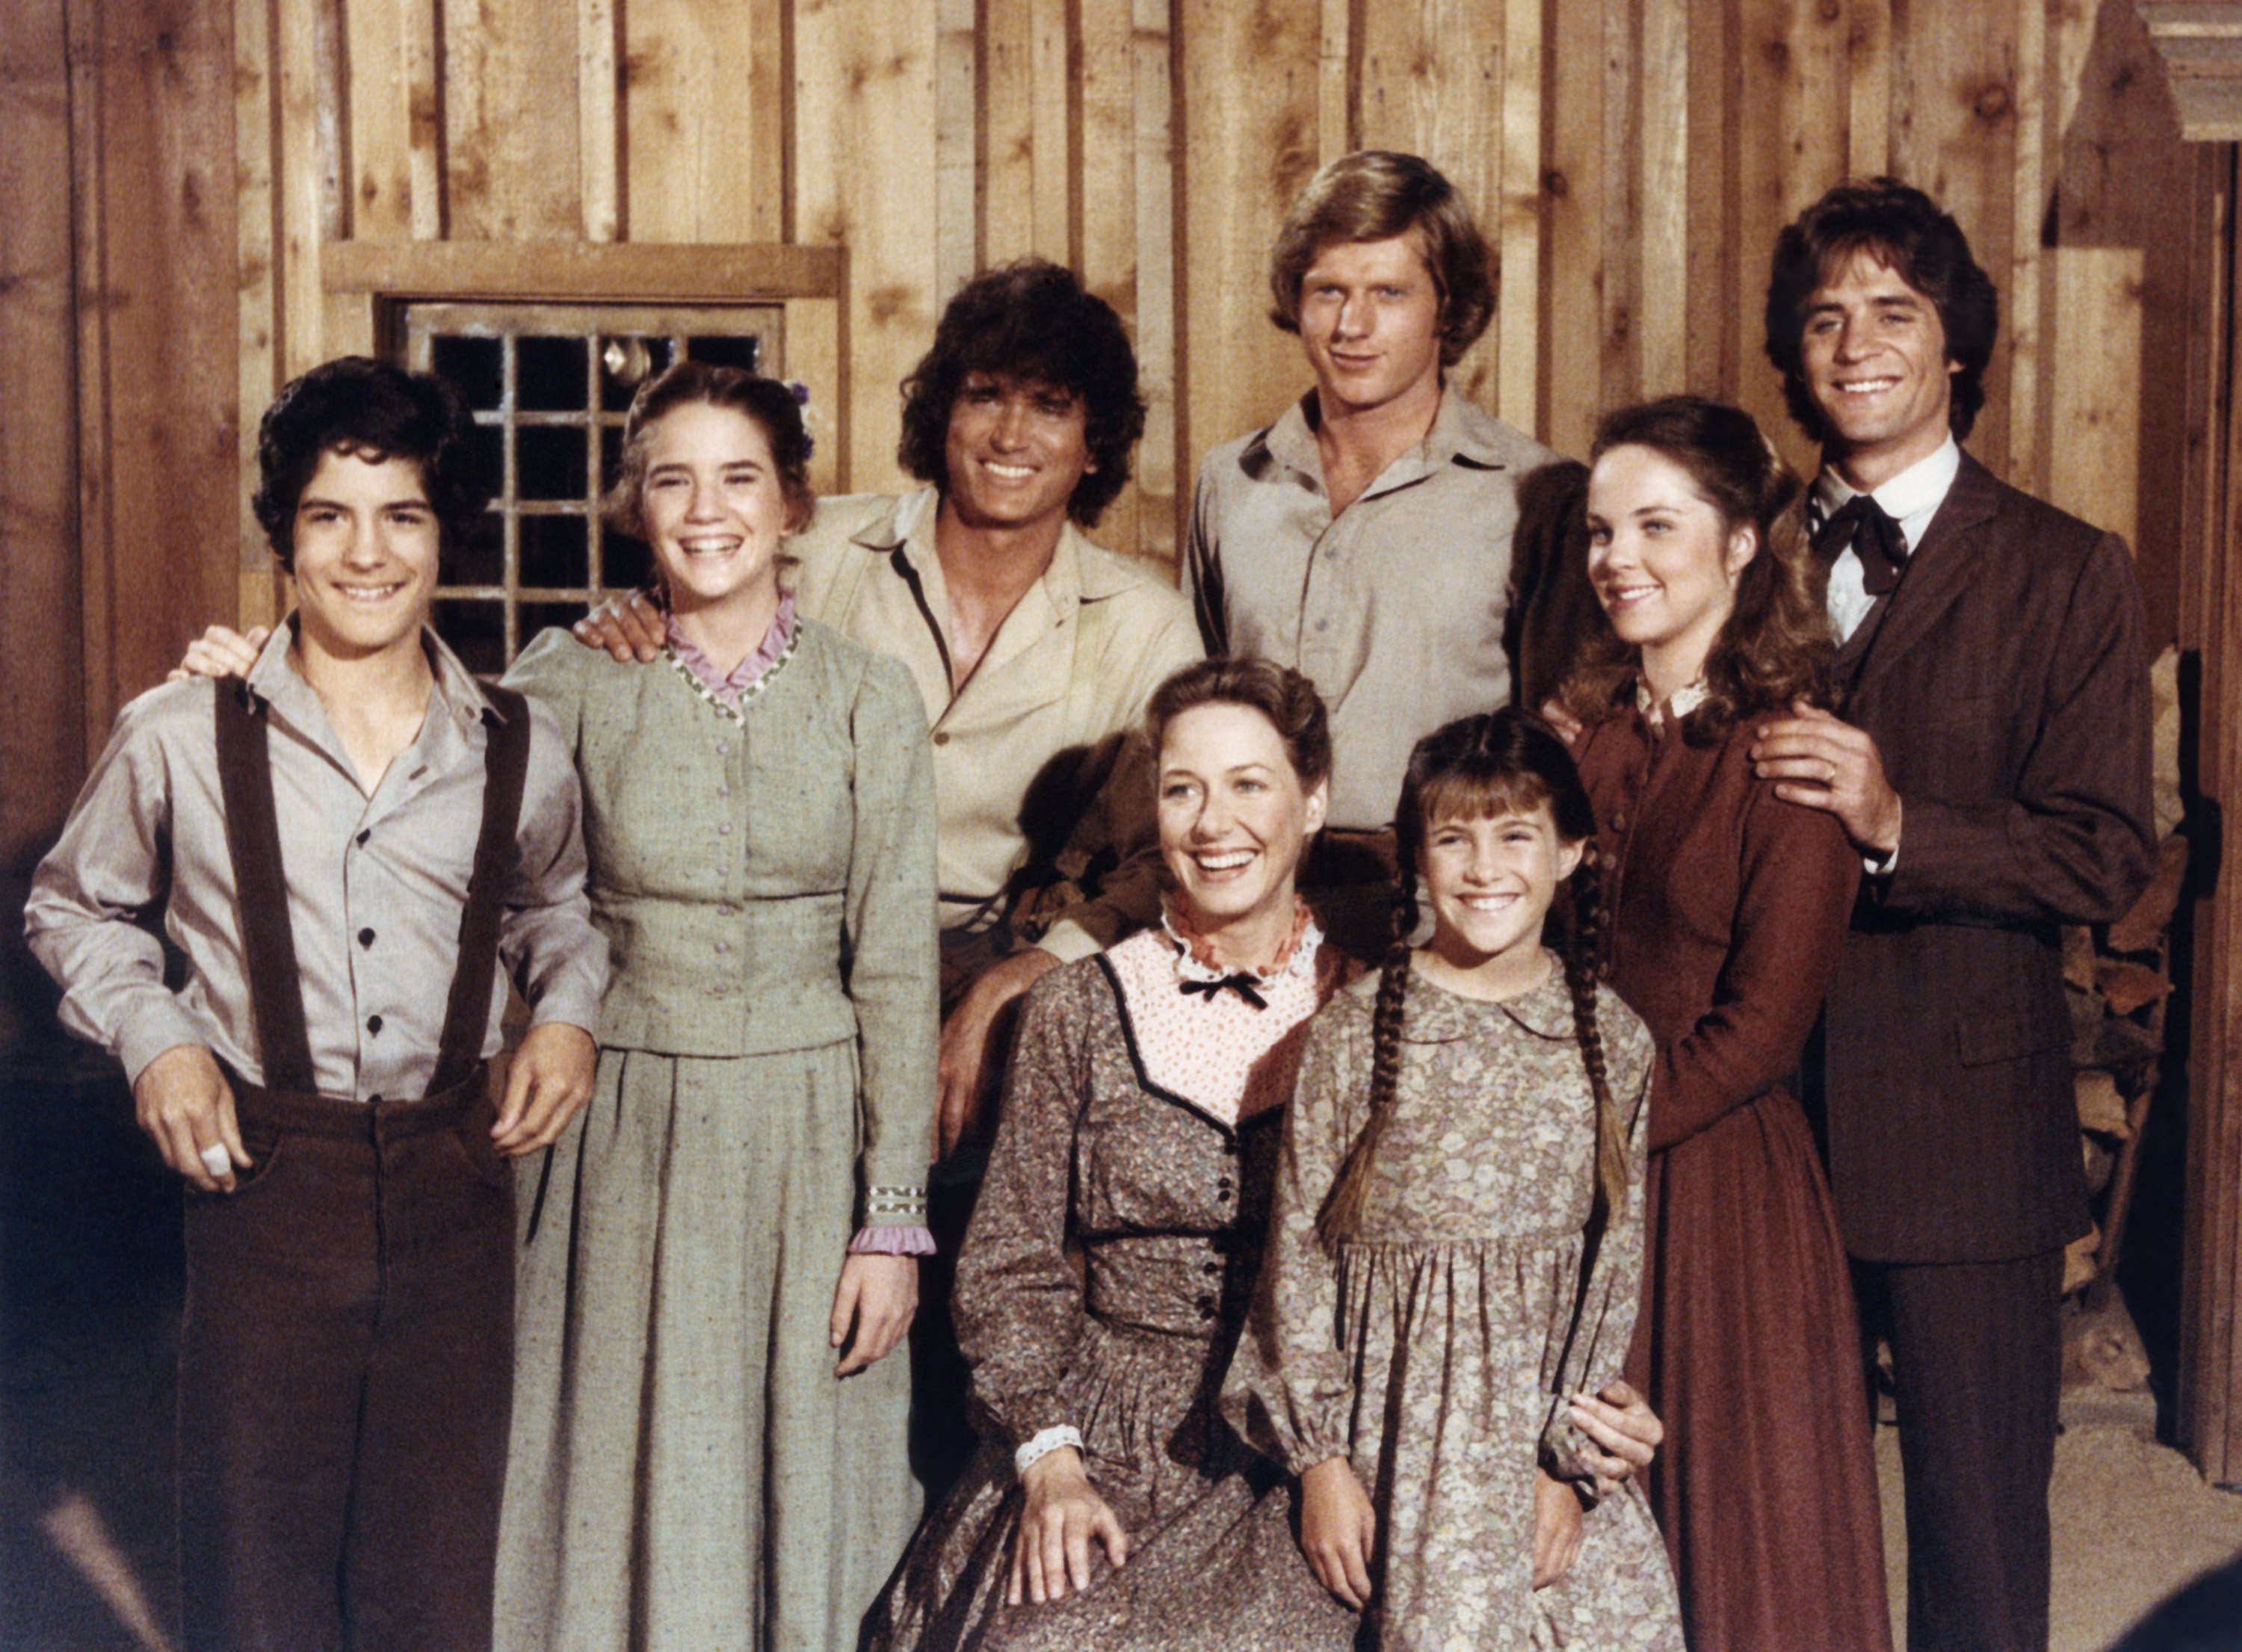 Pictured: (Top L-R) Actors Matthew Laborteaux as Albert Quinn Ingalls, Melissa Gilbert as Laura Elizabeth Ingalls Wilder, Michael Landon as Charles Philip Ingalls, Dean Butler as Almanzo James Wilder, Melissa Sue Anderson as Mary Ingalls Kendall, Linwood Boomer as Adam Kendall, (Bottom L-R) Karen Grassle as Caroline Quiner Holbrook Ingalls, Lindsay/Sidney Greenbush as Carrie Ingalls on "Little House on the Prairie." | Source: Getty Images